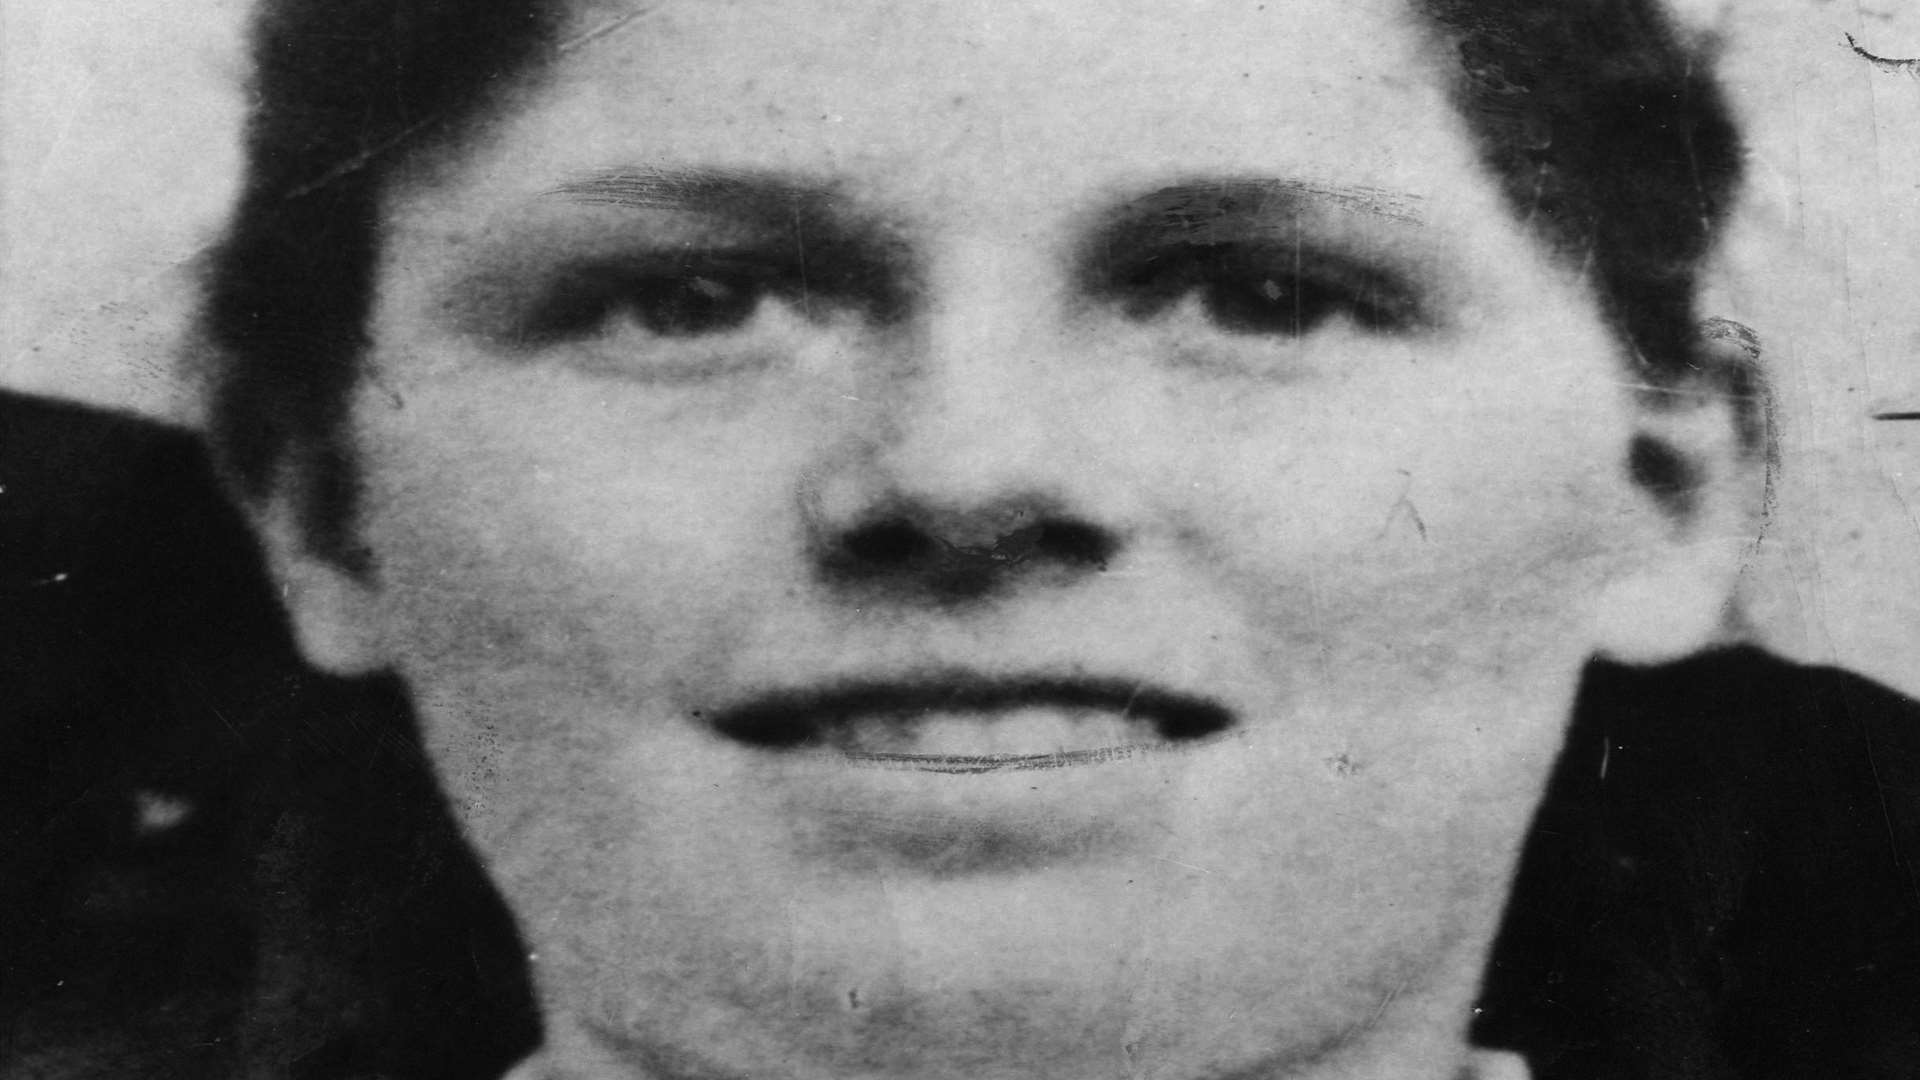 Muriel Drinkwater from Wales, who was killed in 1946